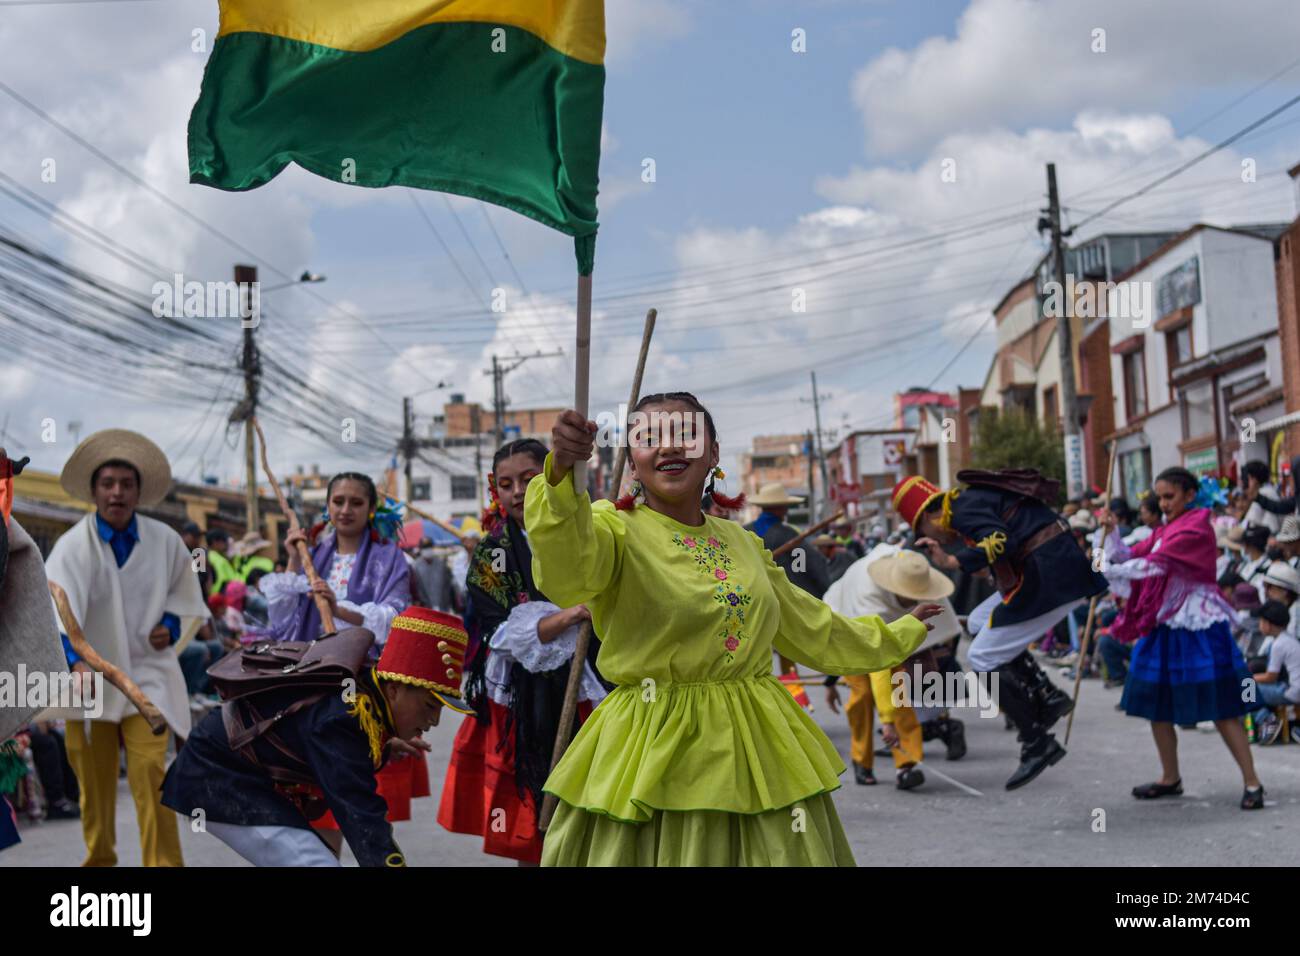 Artists and performers dance during the traditional 'Carnaval de Negros y Blancos' in Pasto, Nariño, January 6, 2023. This UNESCO-recognized carnival takes place every January in the Southern Andean city of Pasto. The ''Carnaval de Negros y Blancos'' has its origins in a mix of Amazonian, Andean and Pacific cultural expressions though art, dances, music and cultural parties. Photo by: Camilo Erasso/Long Visual Press Stock Photo